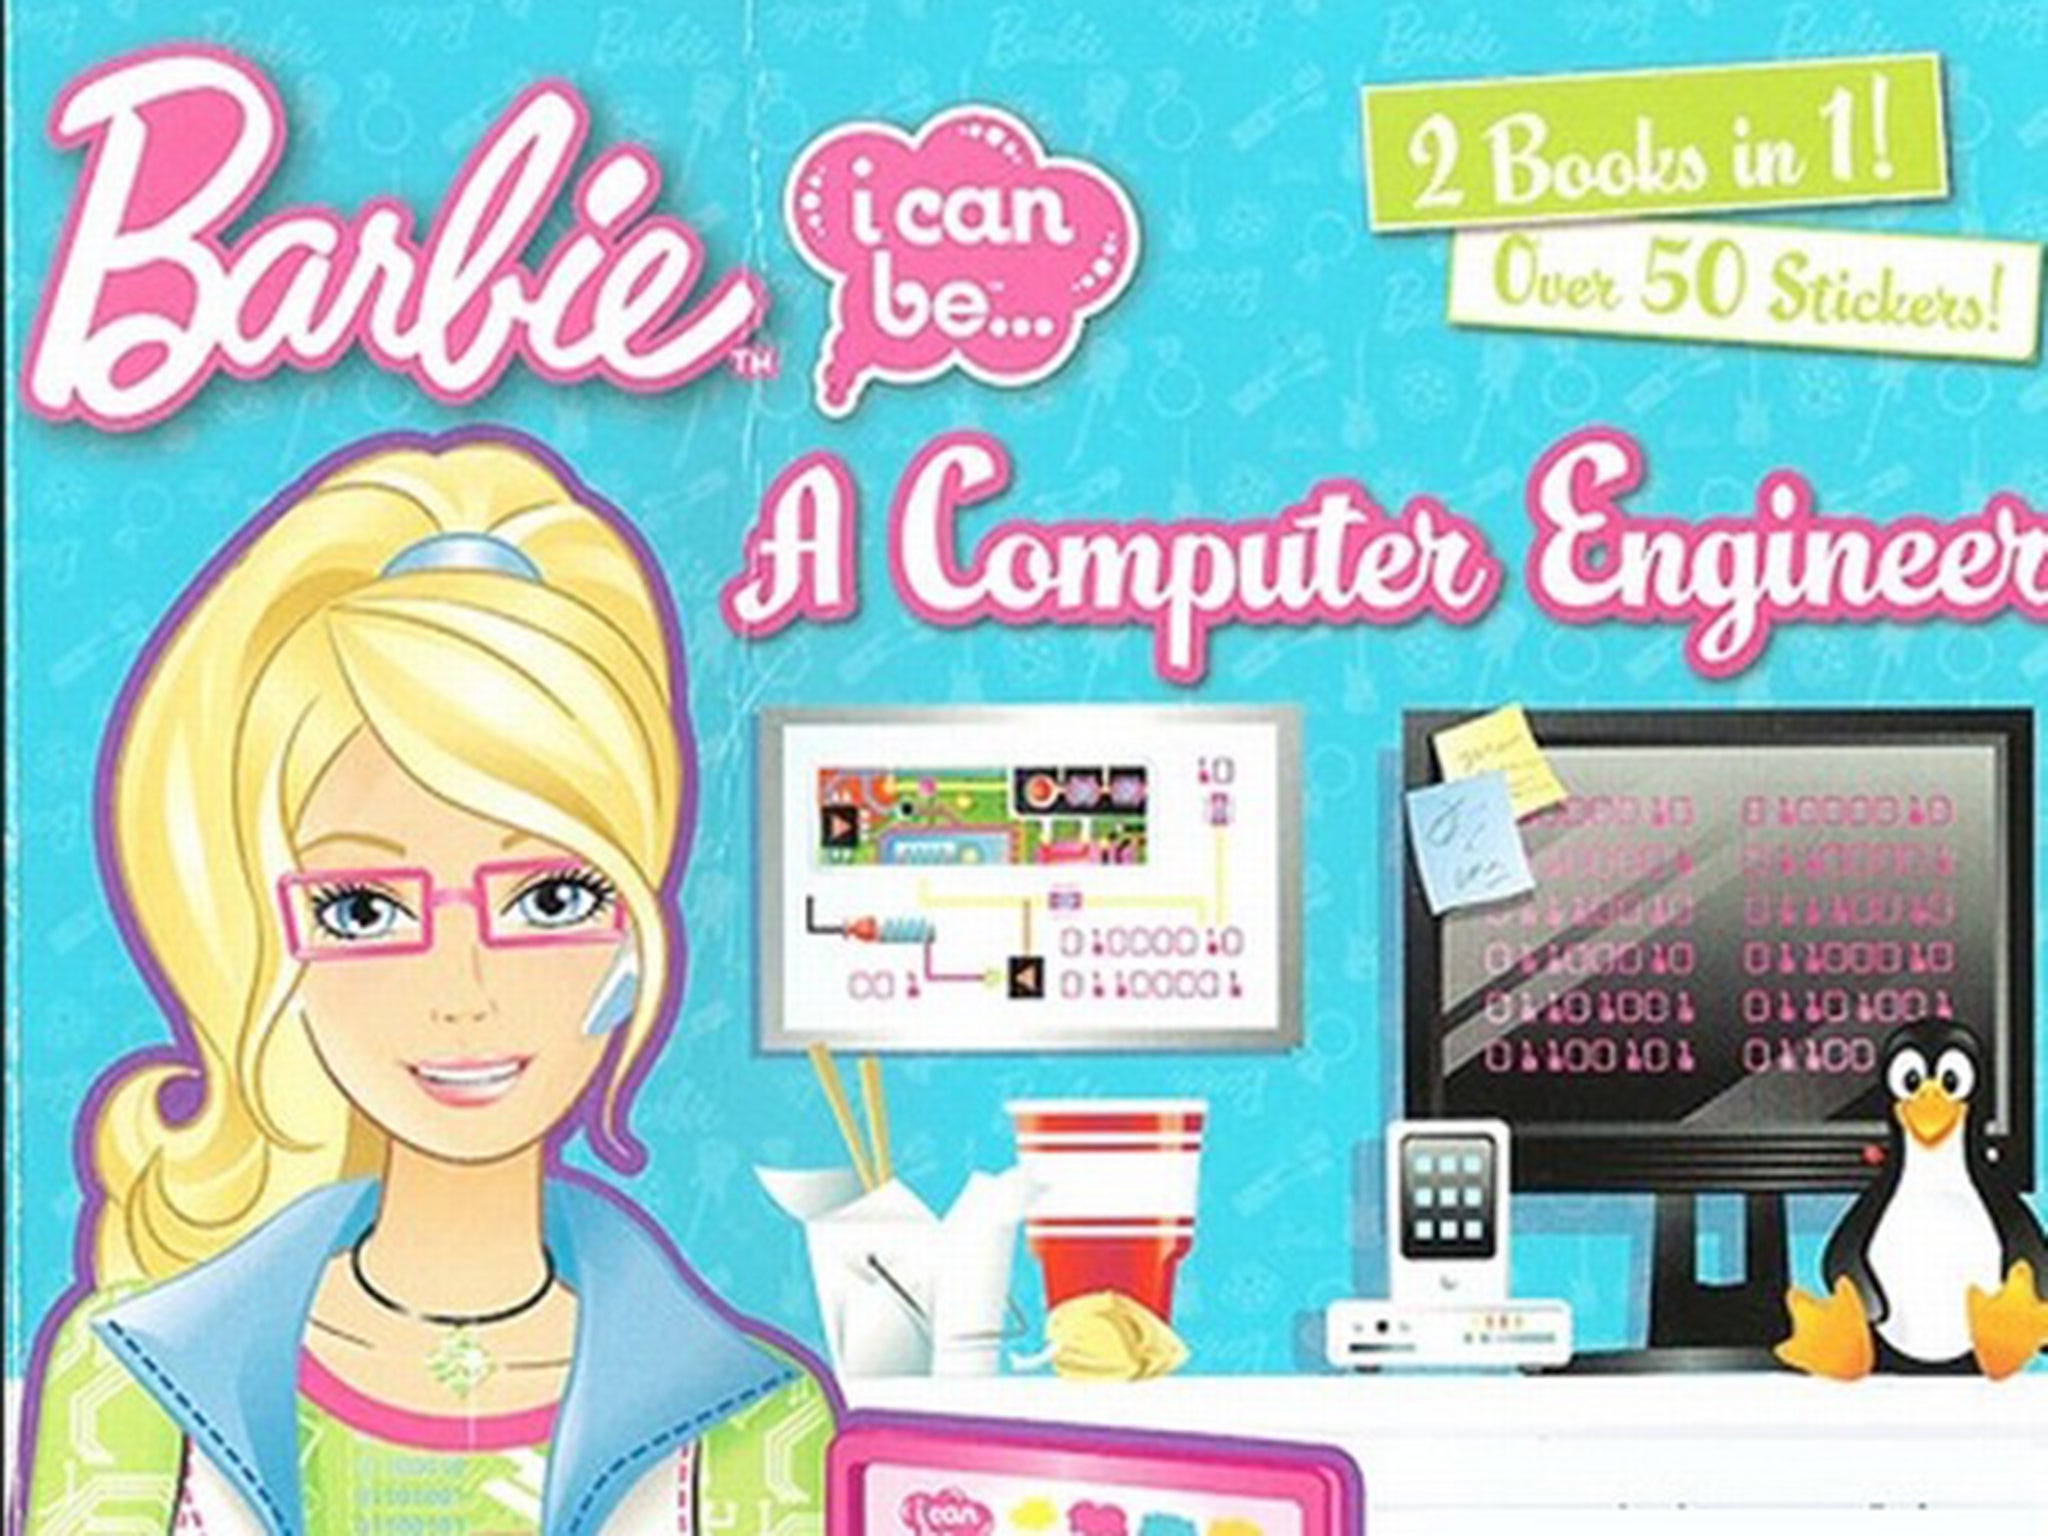 Barbie I Can Be A Computer Engineer was first published in 2010